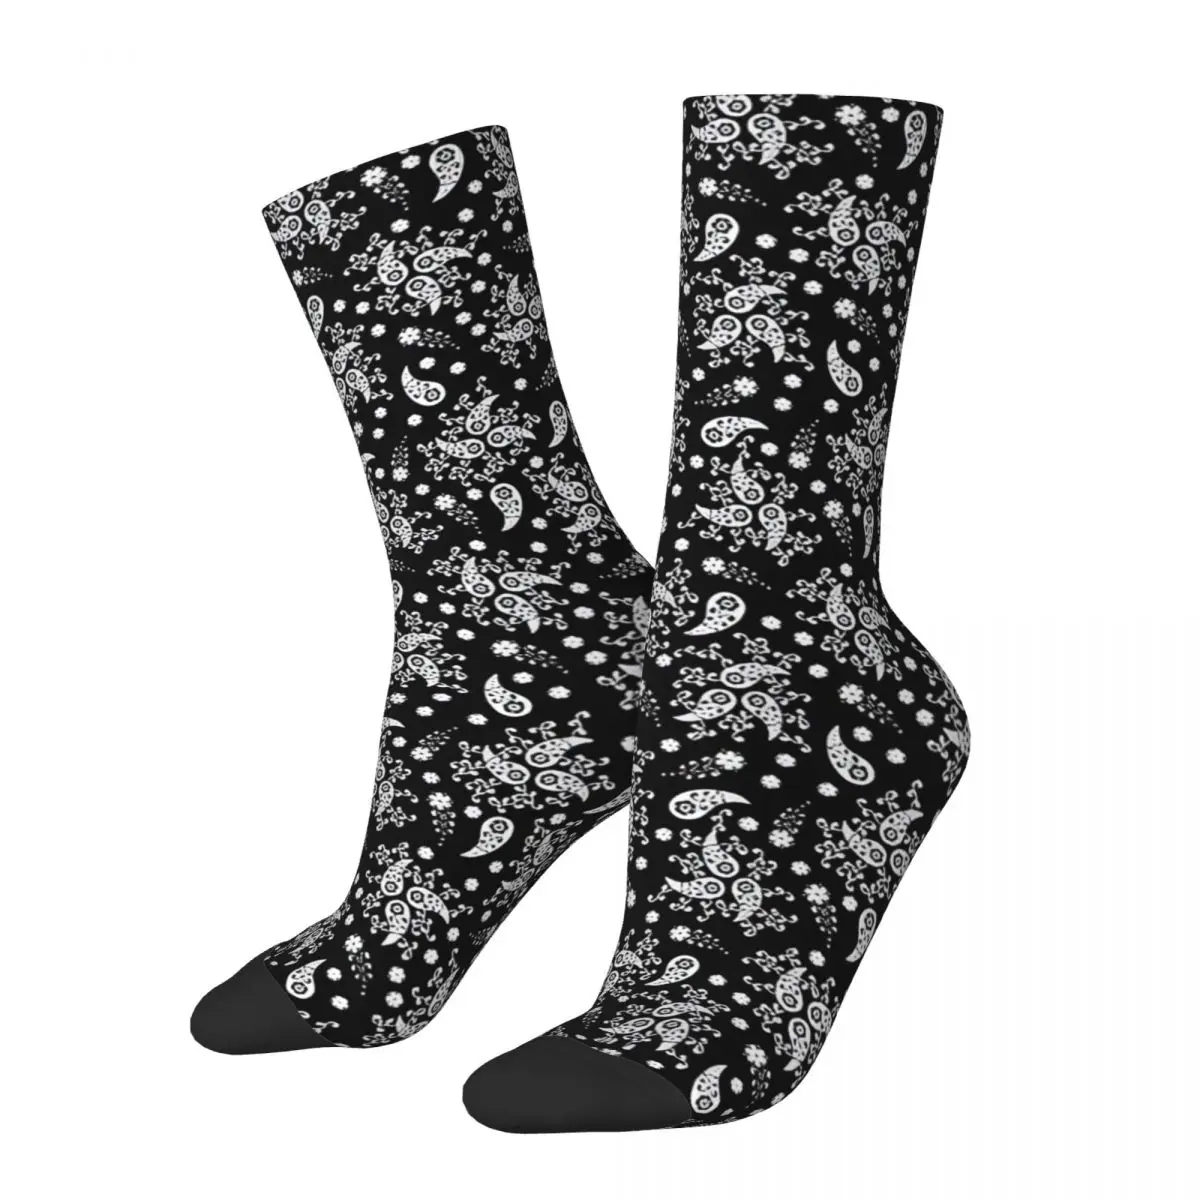 

Vintage Pattern Black And White Paisley Floral Seamless Paisley Men's compression Socks Unisex Style Printed Novelty Crew Sock